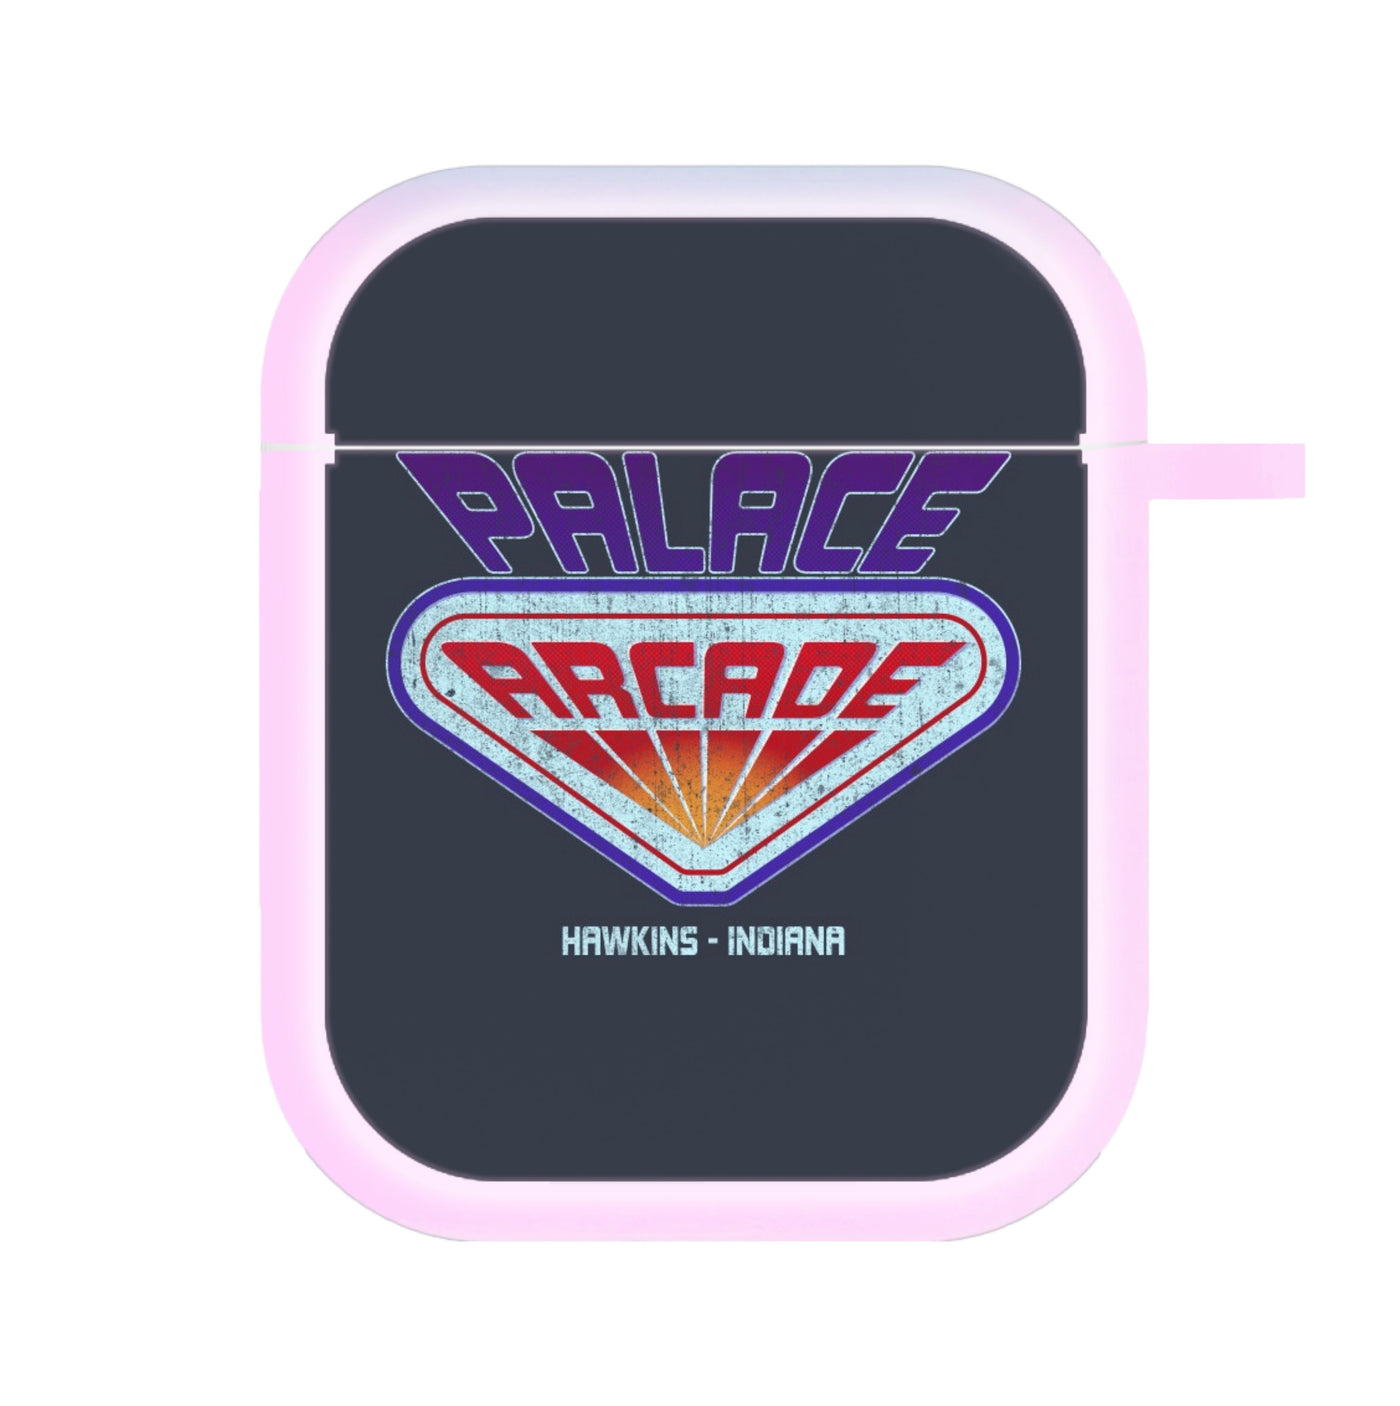 Palace Arcade - Stranger Things AirPods Case